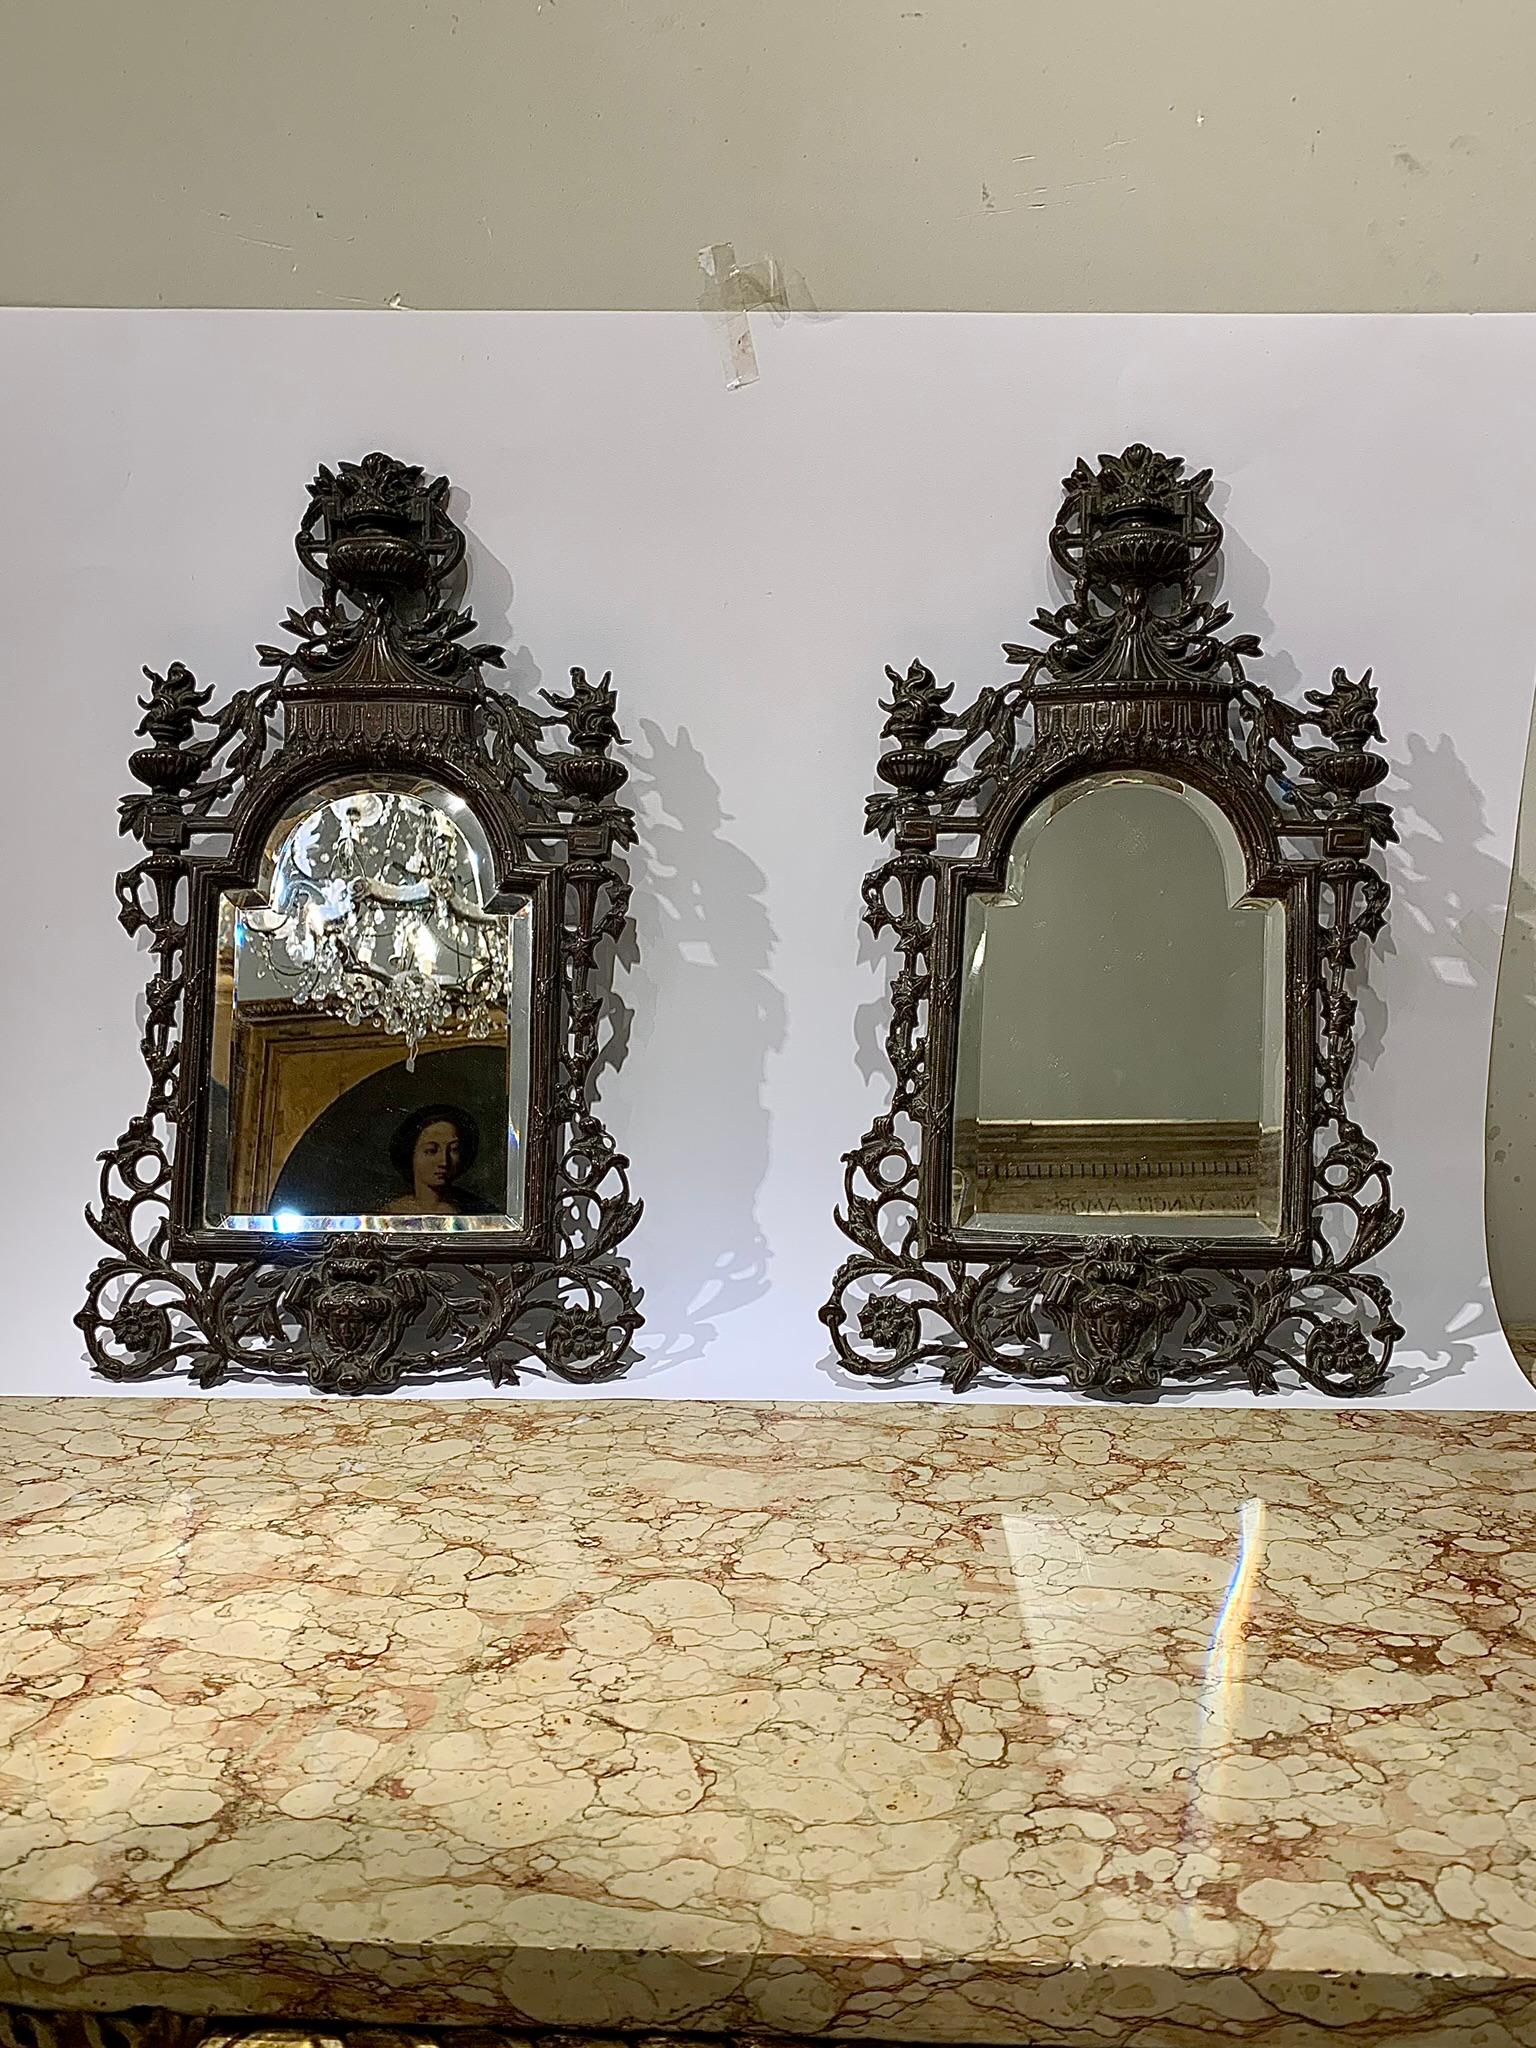 Pair of bronze mirrors made with lost wax casting, Italian manufacture from the second half of the 19th century